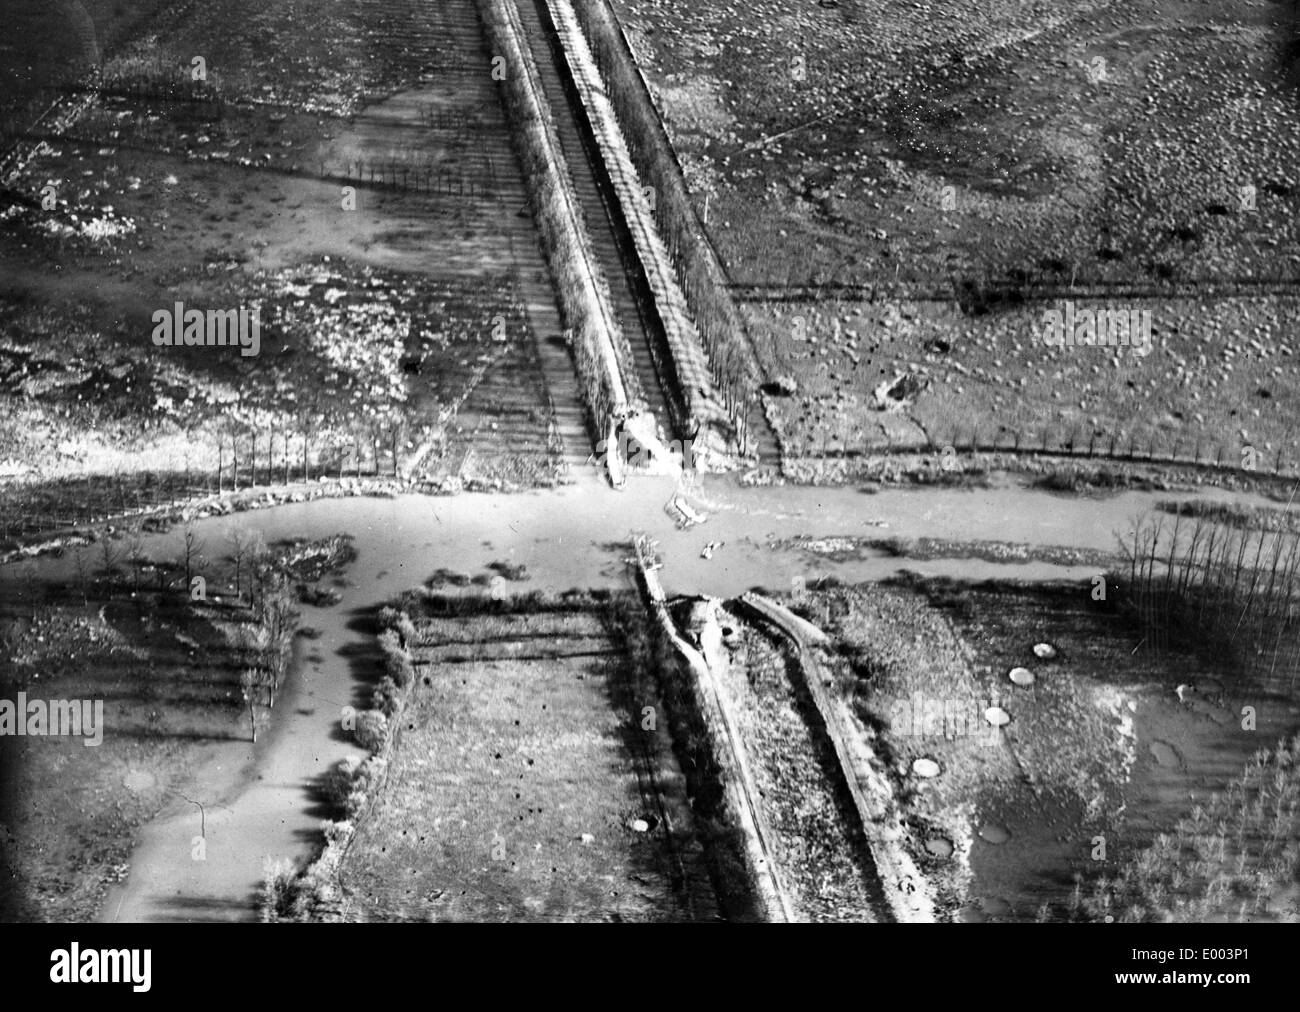 Blown up Oise-Aisne canal at the Western Front, 1918 Stock Photo